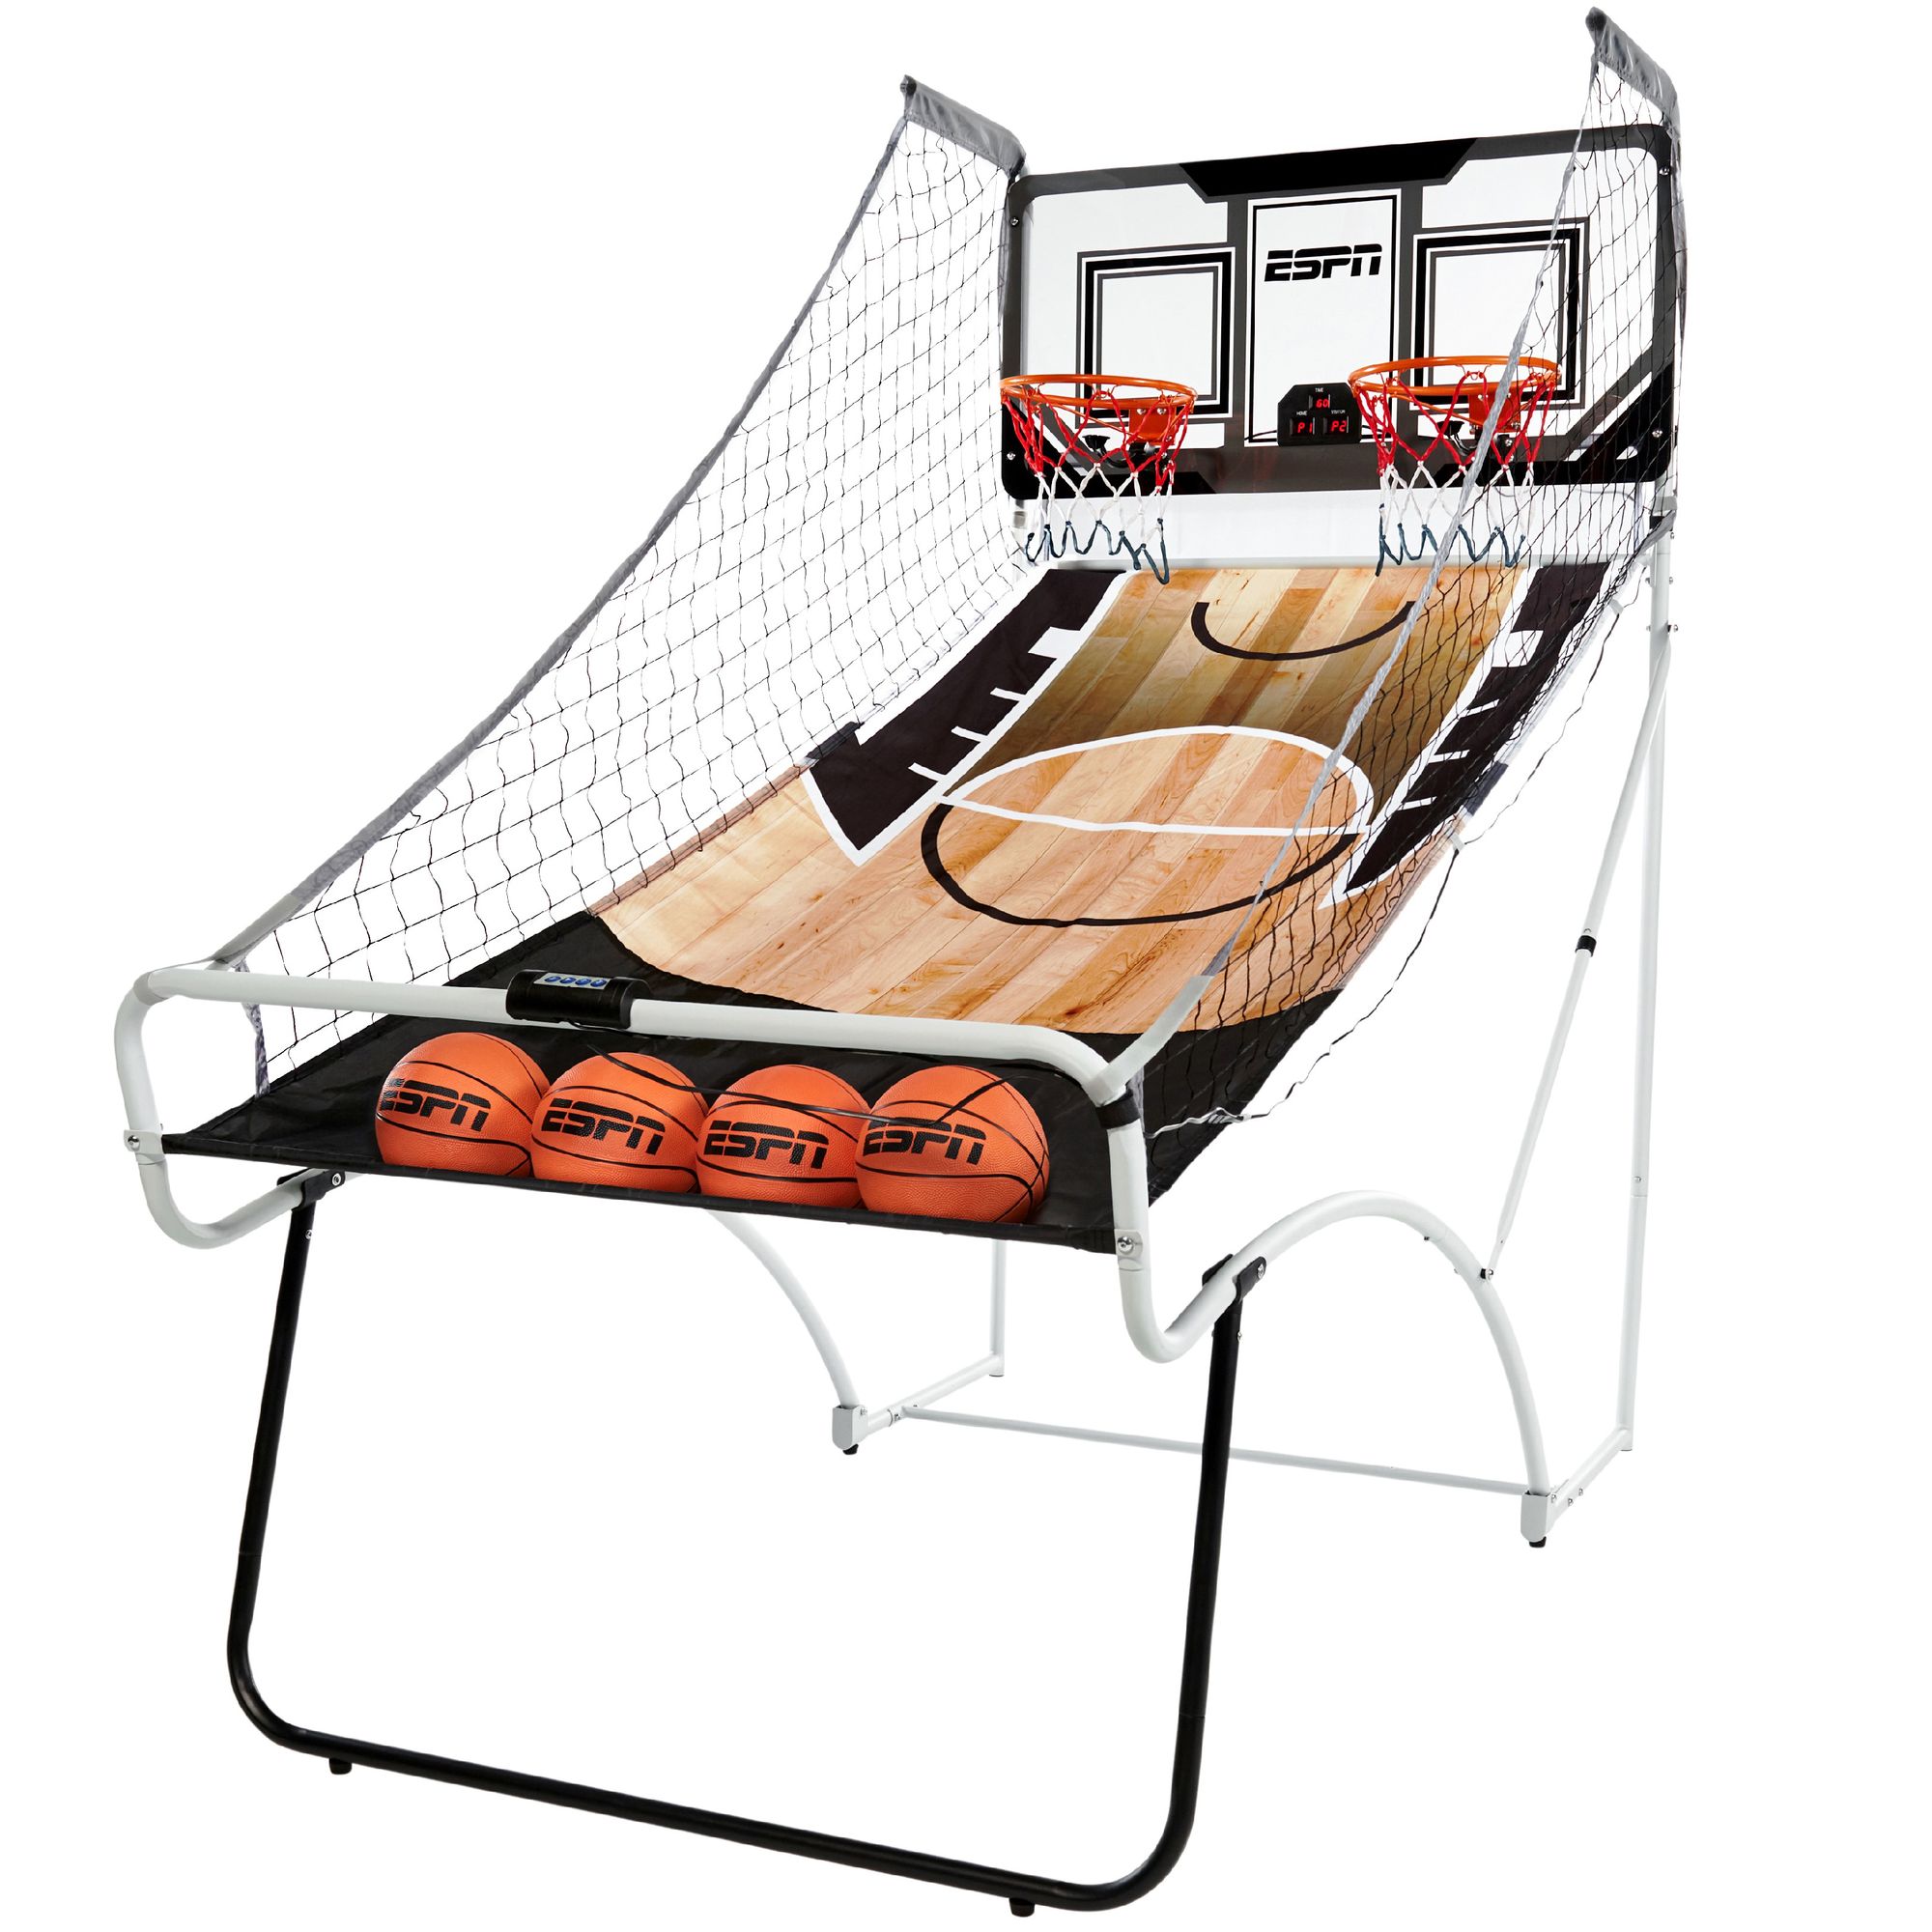 ESPN 81 inch 2-Player Foldable Arcade Basketball Game - image 1 of 11